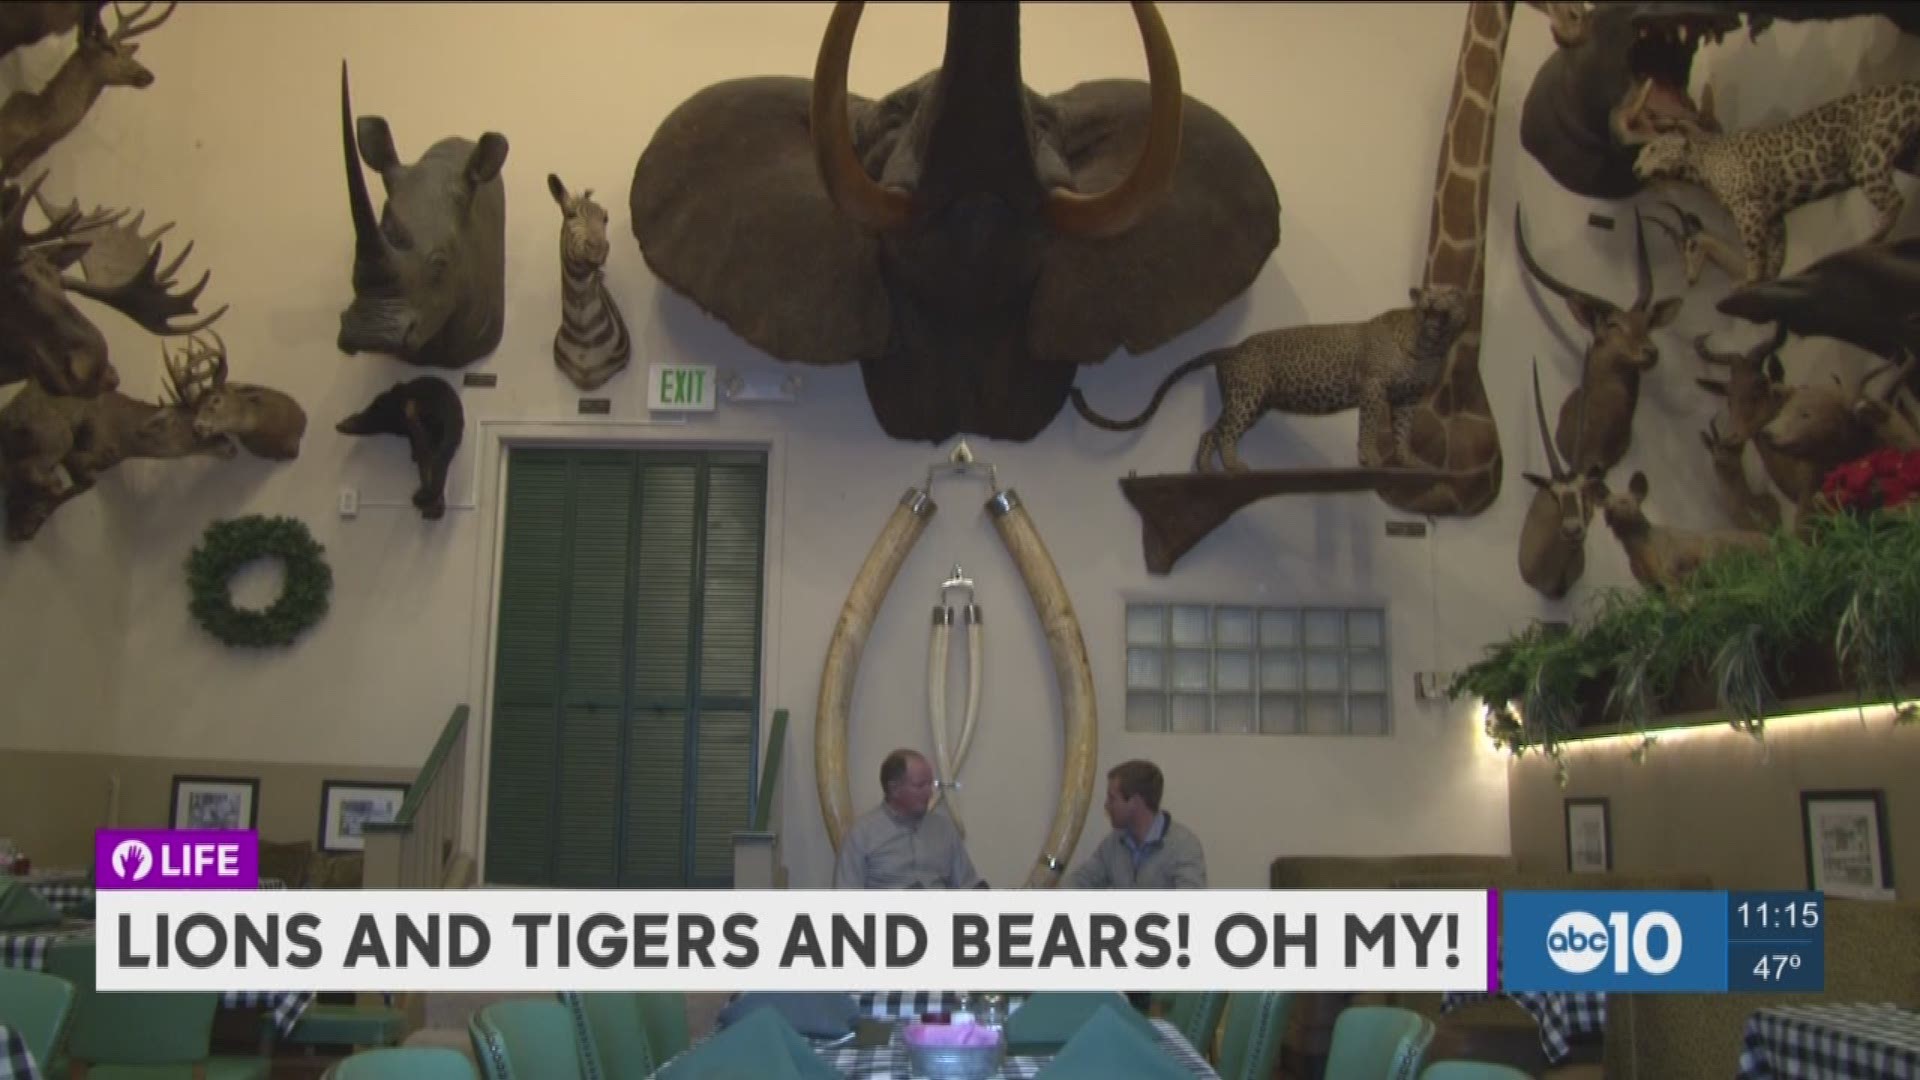 One restaurant has more than 250 animal heads decorating its walls. (Jan. 4, 2017)